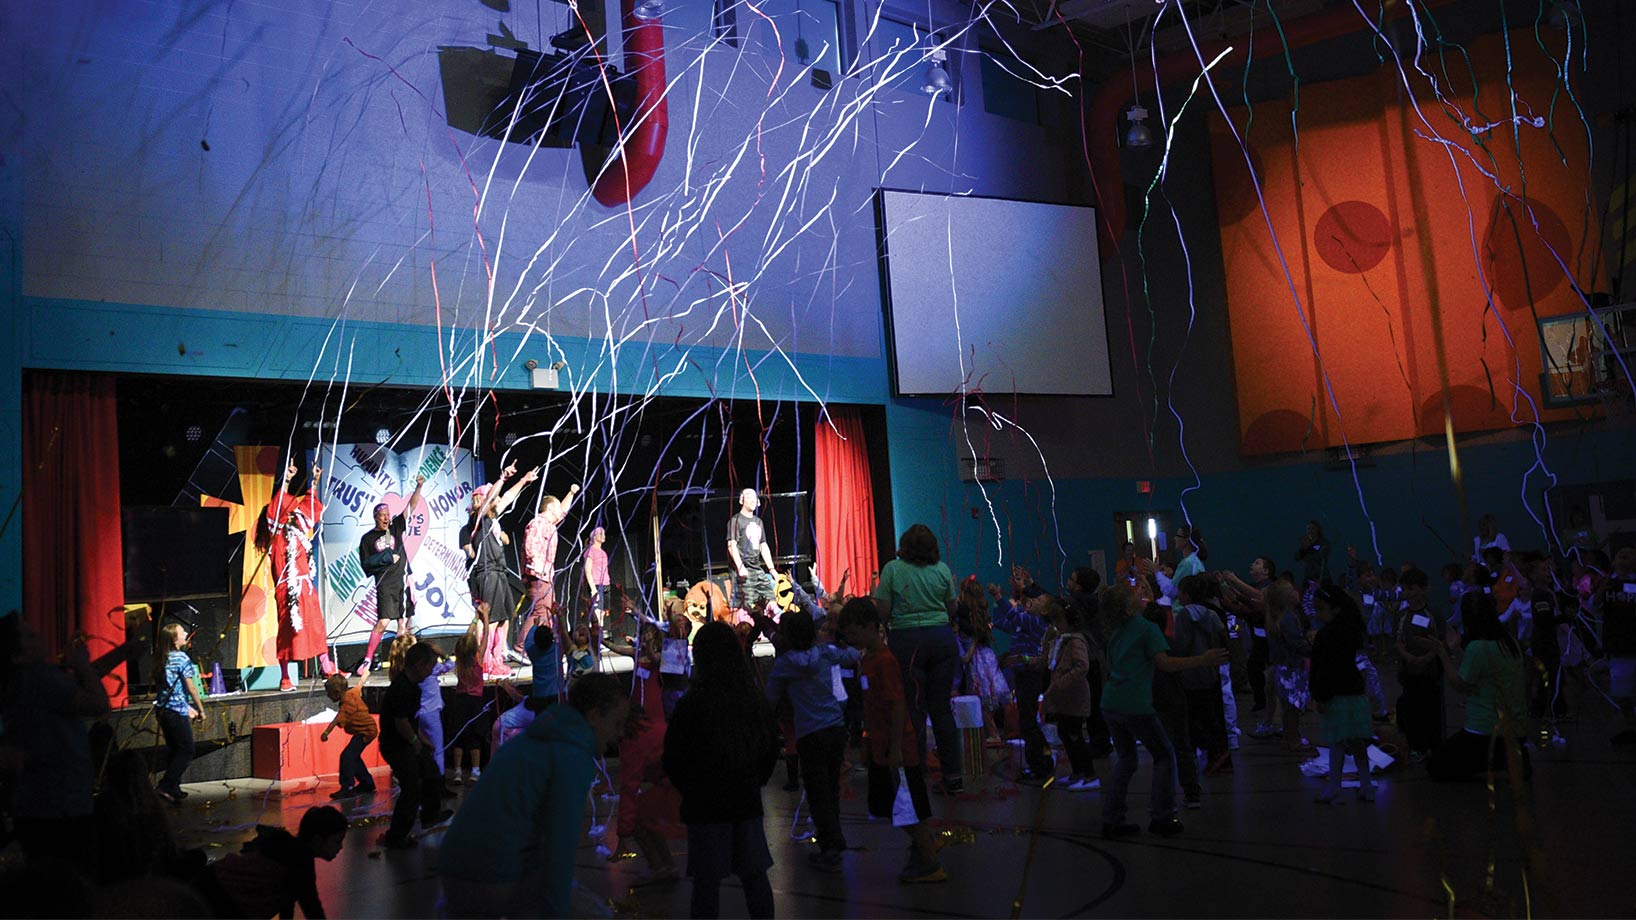 Kids dancing in gym with adults dancing on stage with streamers in the air